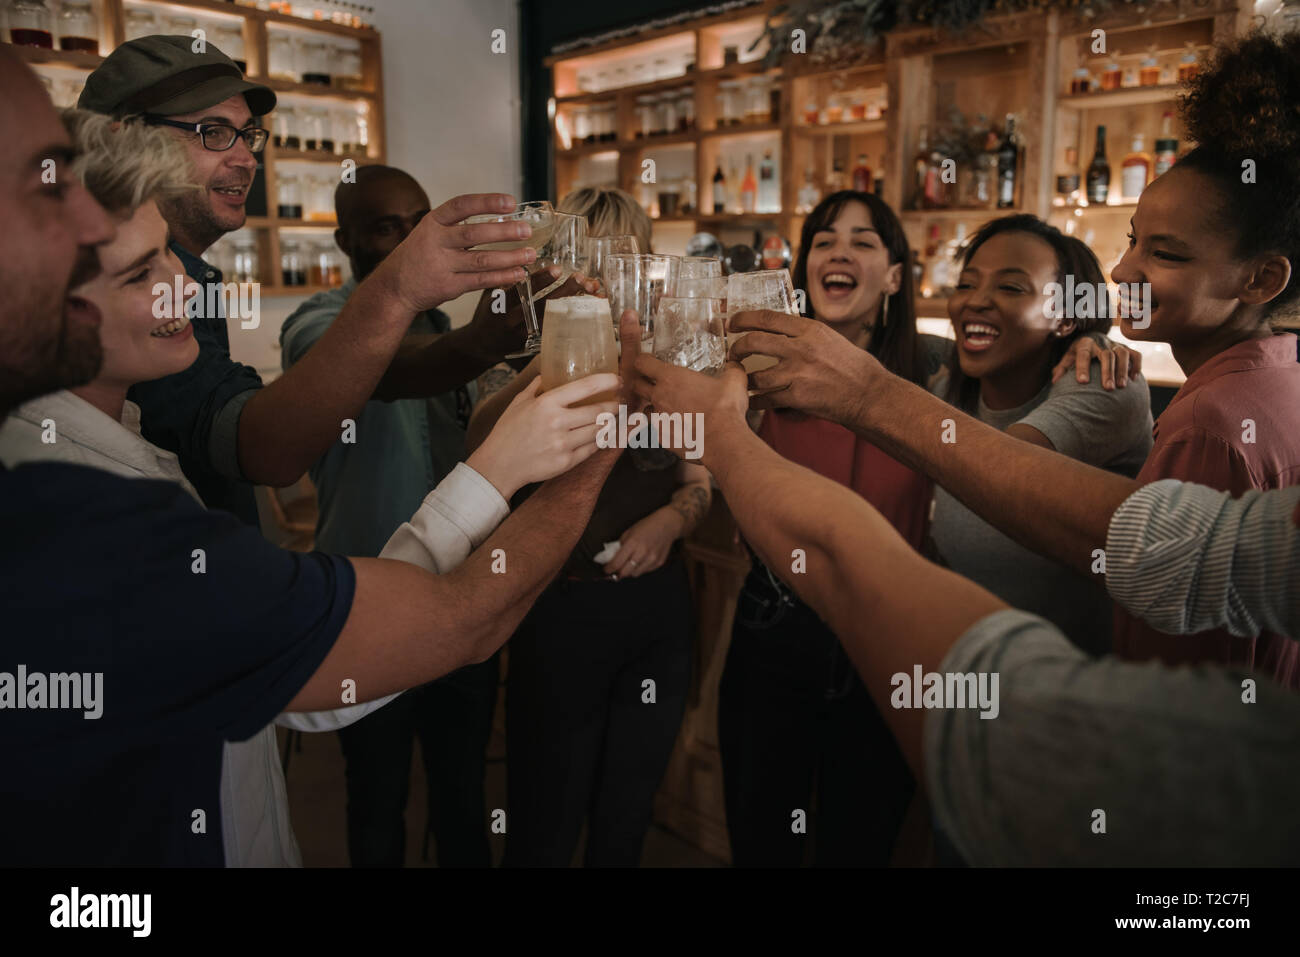 Diverse group of young friends cheering with drinks while hanging out together in a bar in the evening Stock Photo